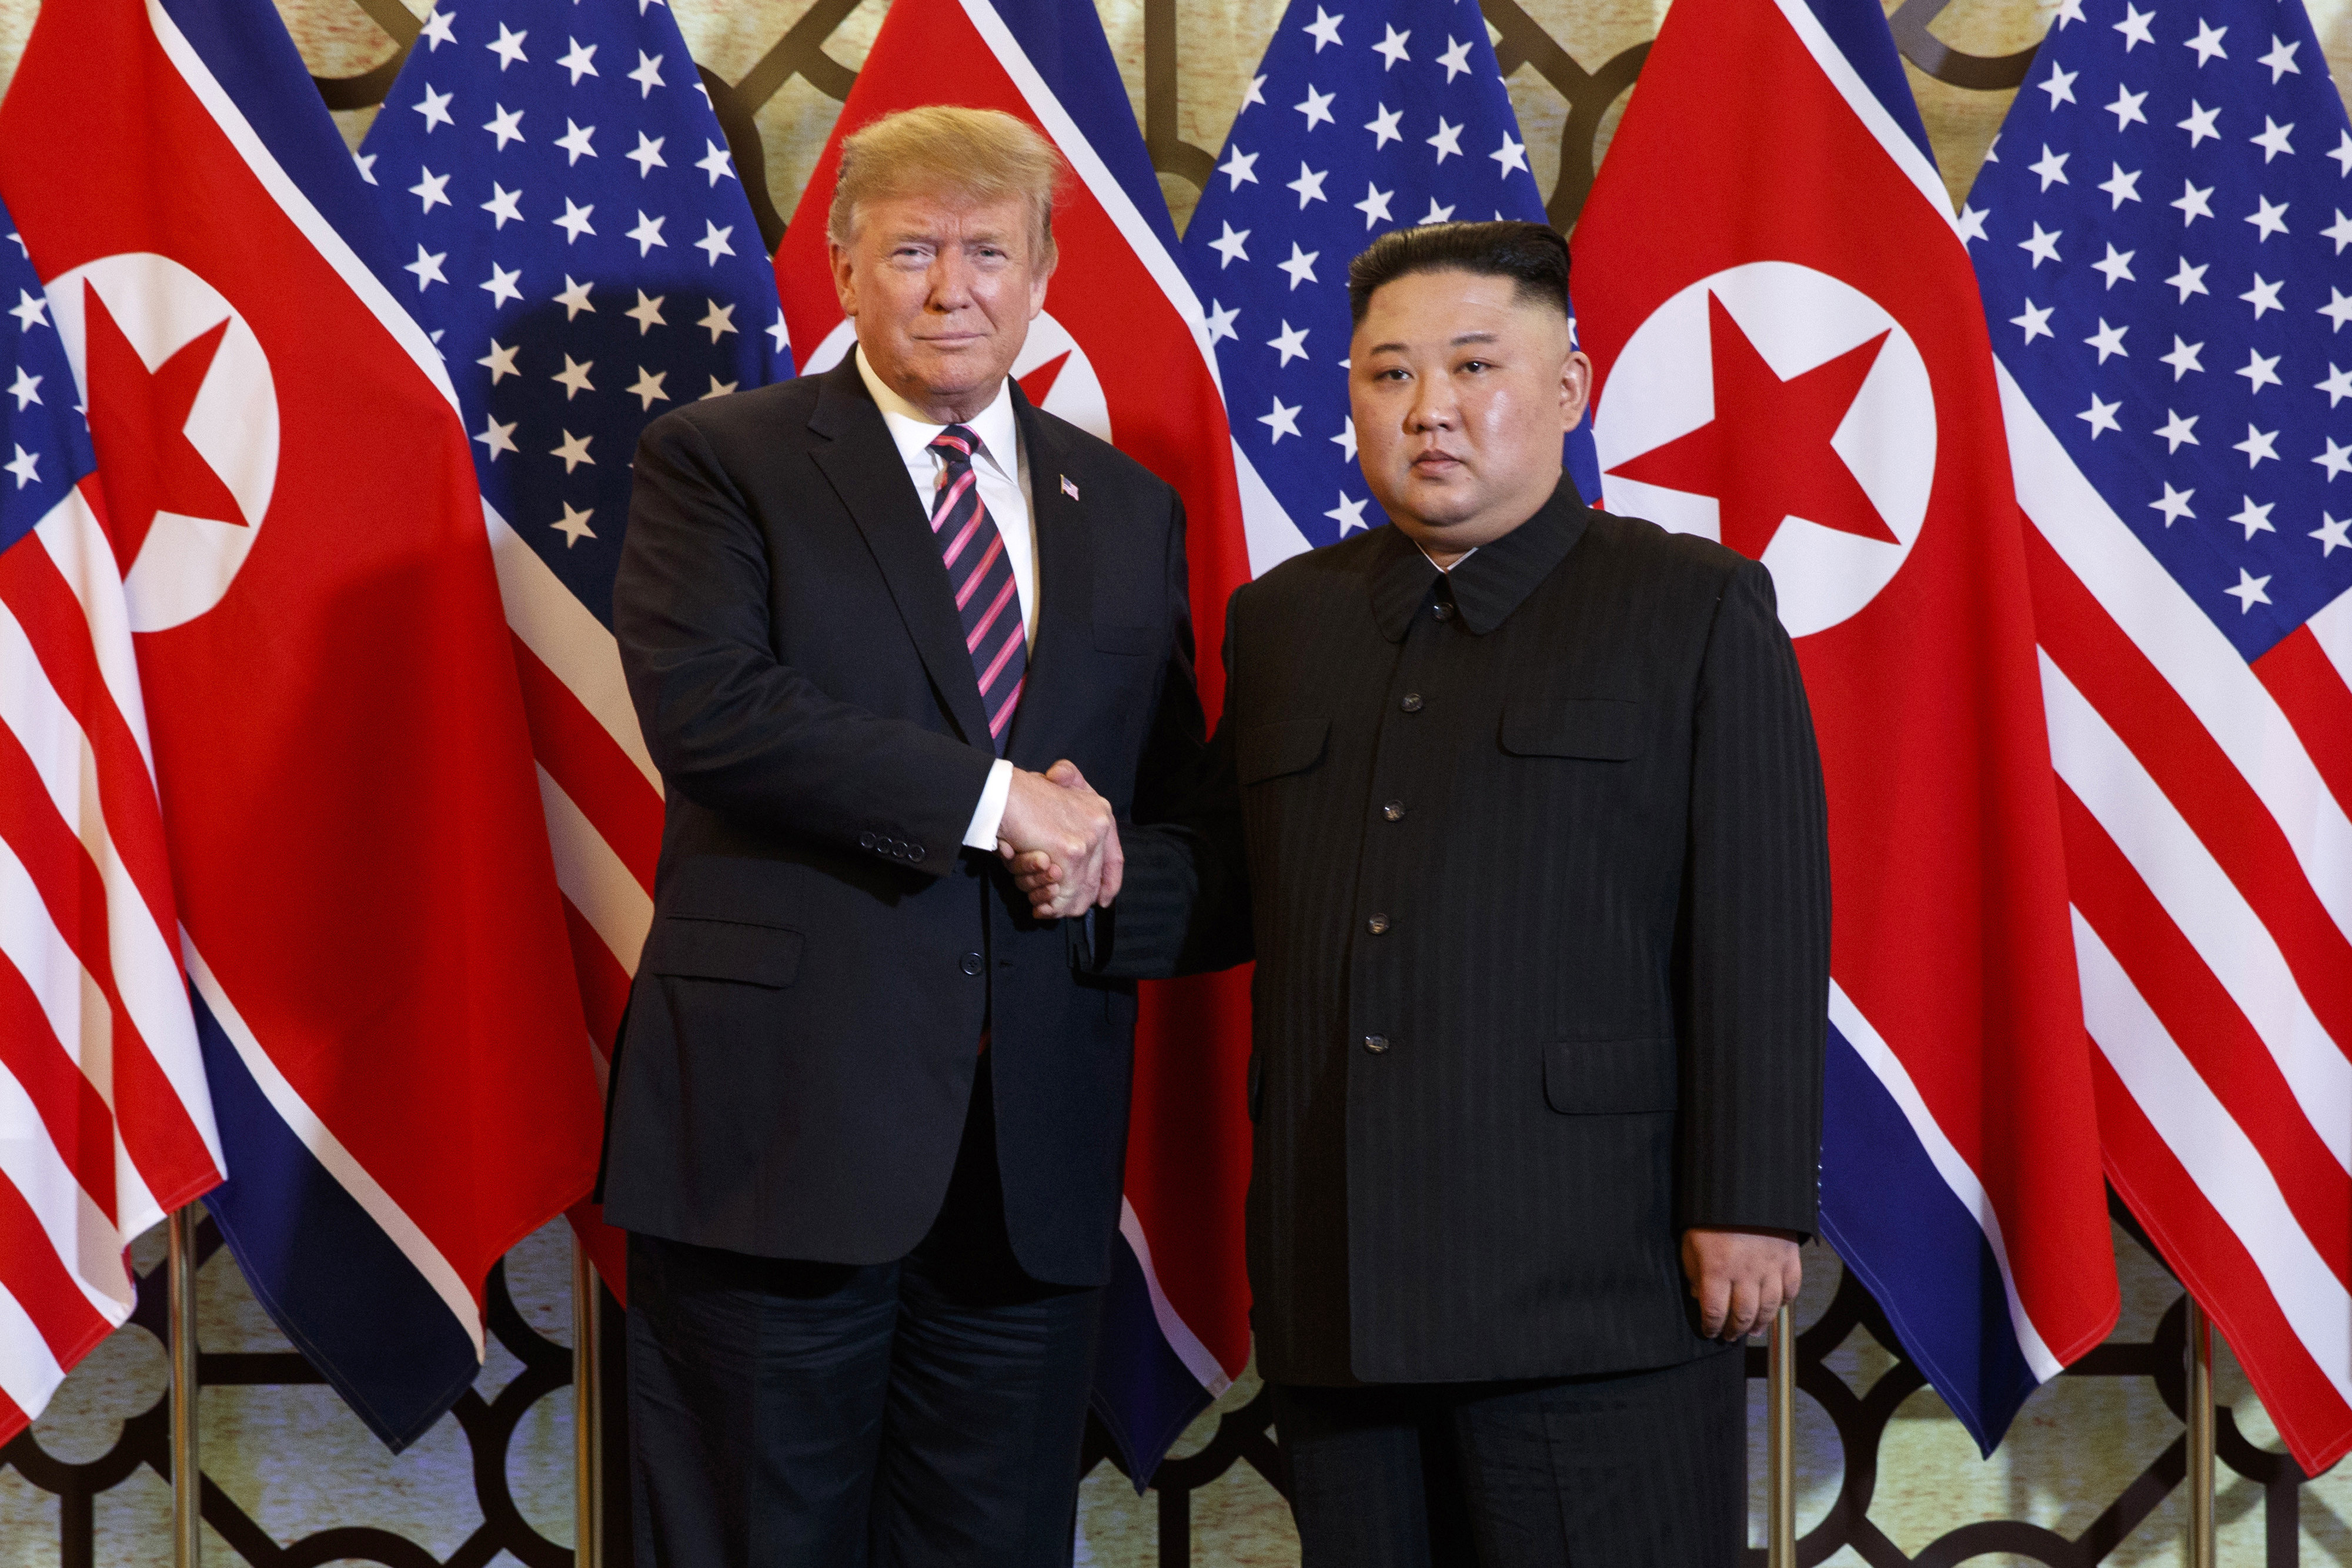 Then US President Donald Trump with North Korean leader Kim Jong-un in Hanoi, Vietnam, in 2019. Haley has accused Trump of writing “love letters” to Kim. Photo: AP